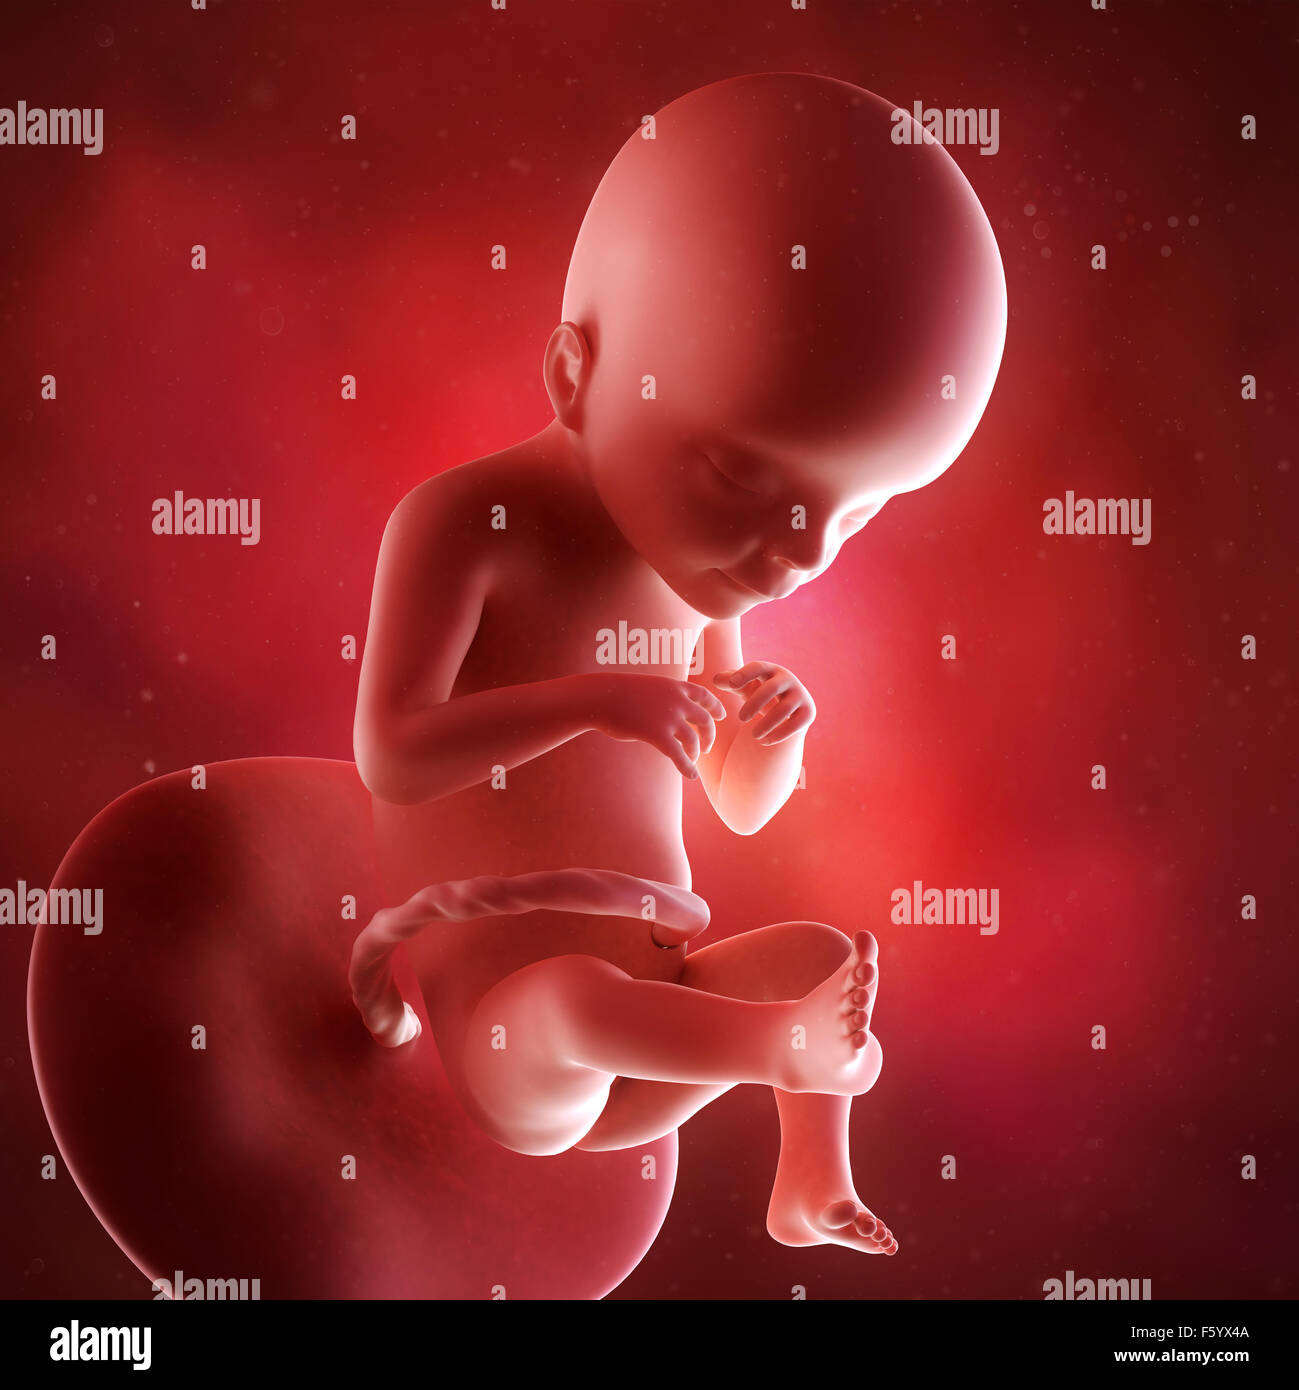 medical accurate 3d illustration of a fetus week 21 Stock Photo